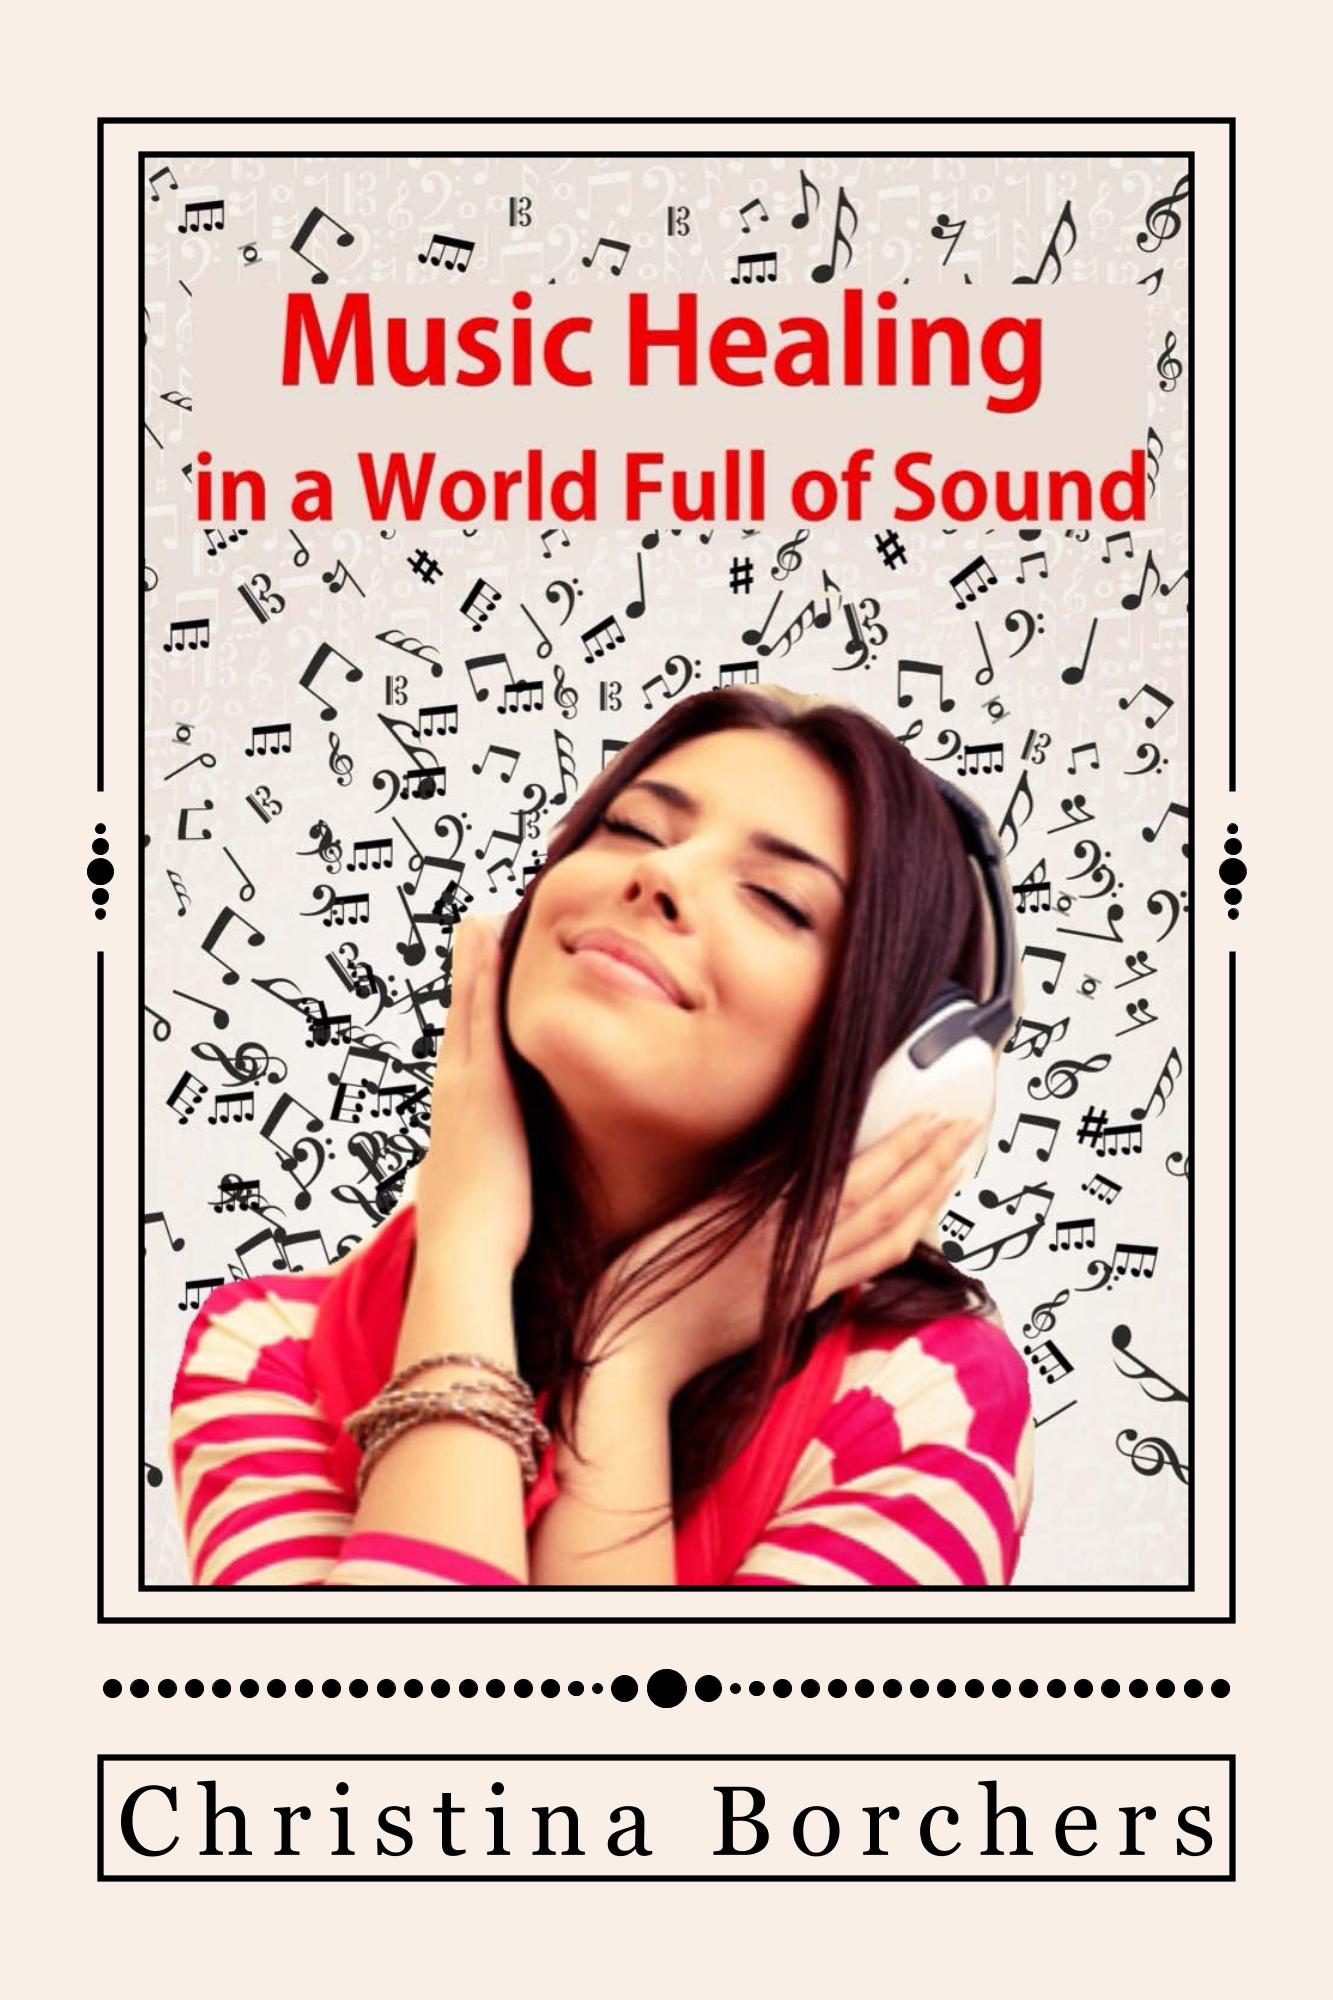 FREE: Music Healing in a World Full of Sound by Christina Borchers